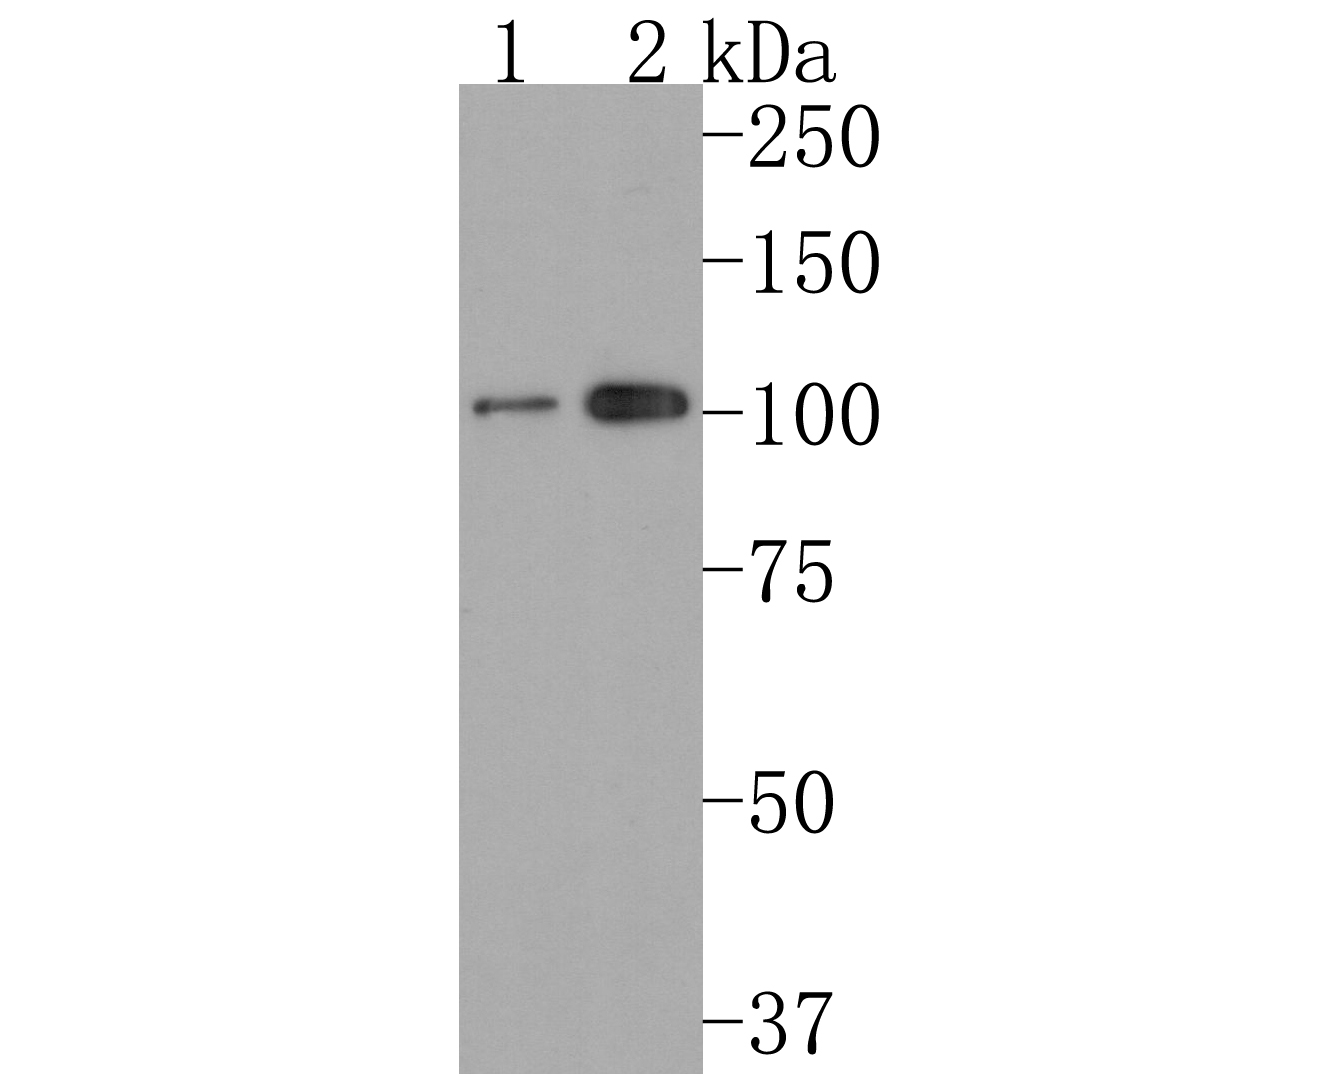 Western blot analysis of TGN46 on different lysates. Proteins were transferred to a PVDF membrane and blocked with 5% BSA in PBS for 1 hour at room temperature. The primary antibody (ET1702-56, 1/500) was used in 5% BSA at room temperature for 2 hours. Goat Anti-Rabbit IgG - HRP Secondary Antibody (HA1001) at 1:200,000 dilution was used for 1 hour at room temperature.<br />
Positive control: <br />
Lane 1: NIH/3T3 cell lysate<br />
Lane 2: Hela cell lysate